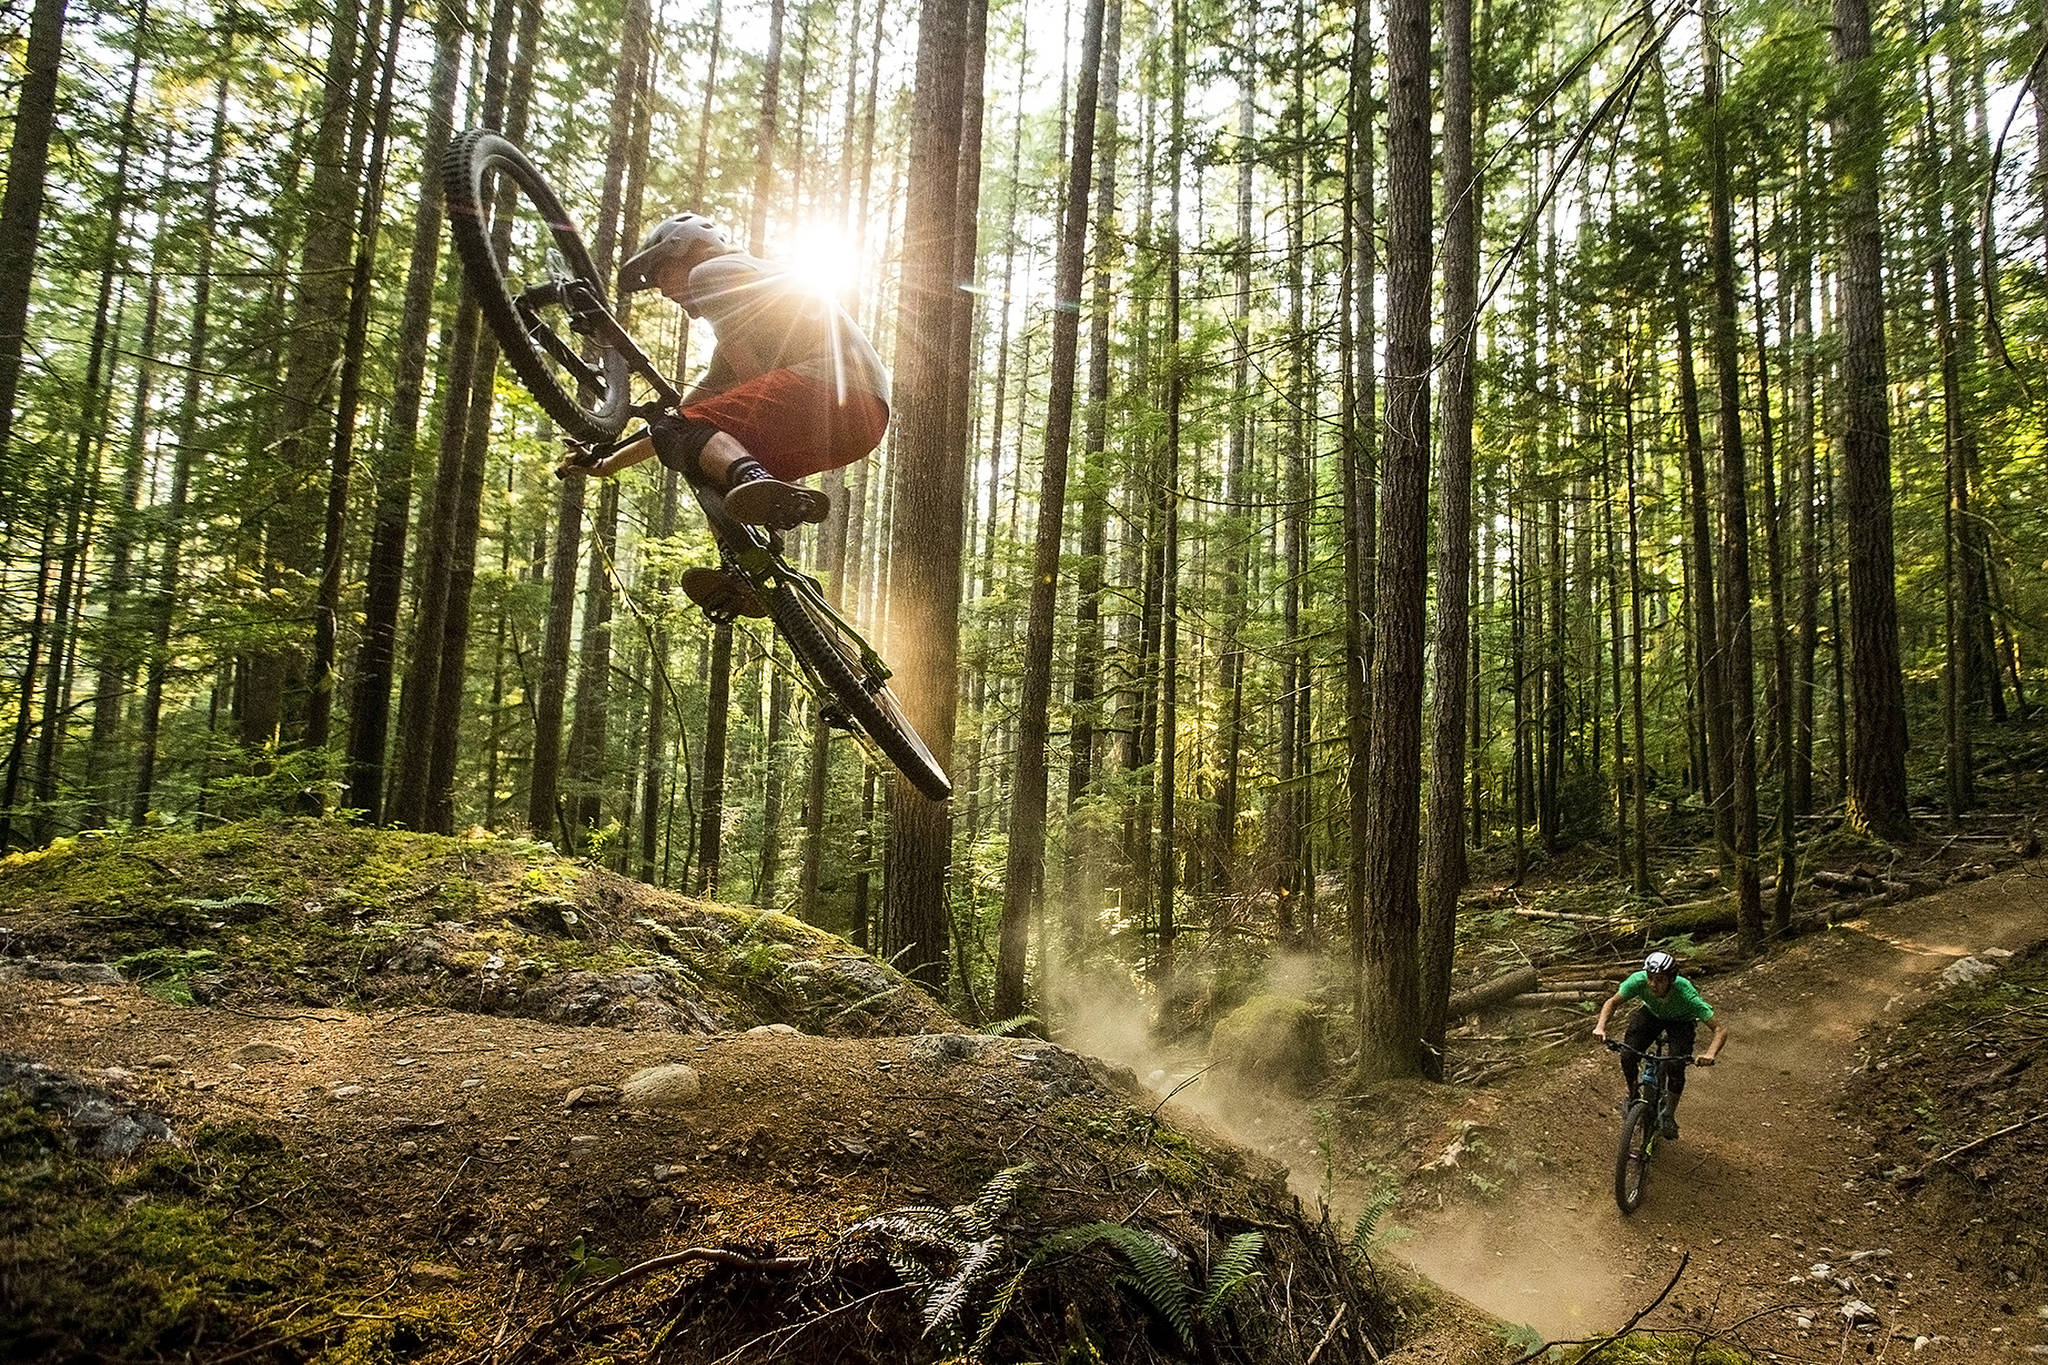 Skye Schillhammer (left) catches air off a rocky lip as Oliver Parish exits a corner on Darrington’s new mountain bike trail system, located at the base of North Mountain. Schillhammer grew up in Darrington and now resides in Bellingham where he works for Transition Bikes, a mountain bike manufacturer. (Ian Terry / The Herald)